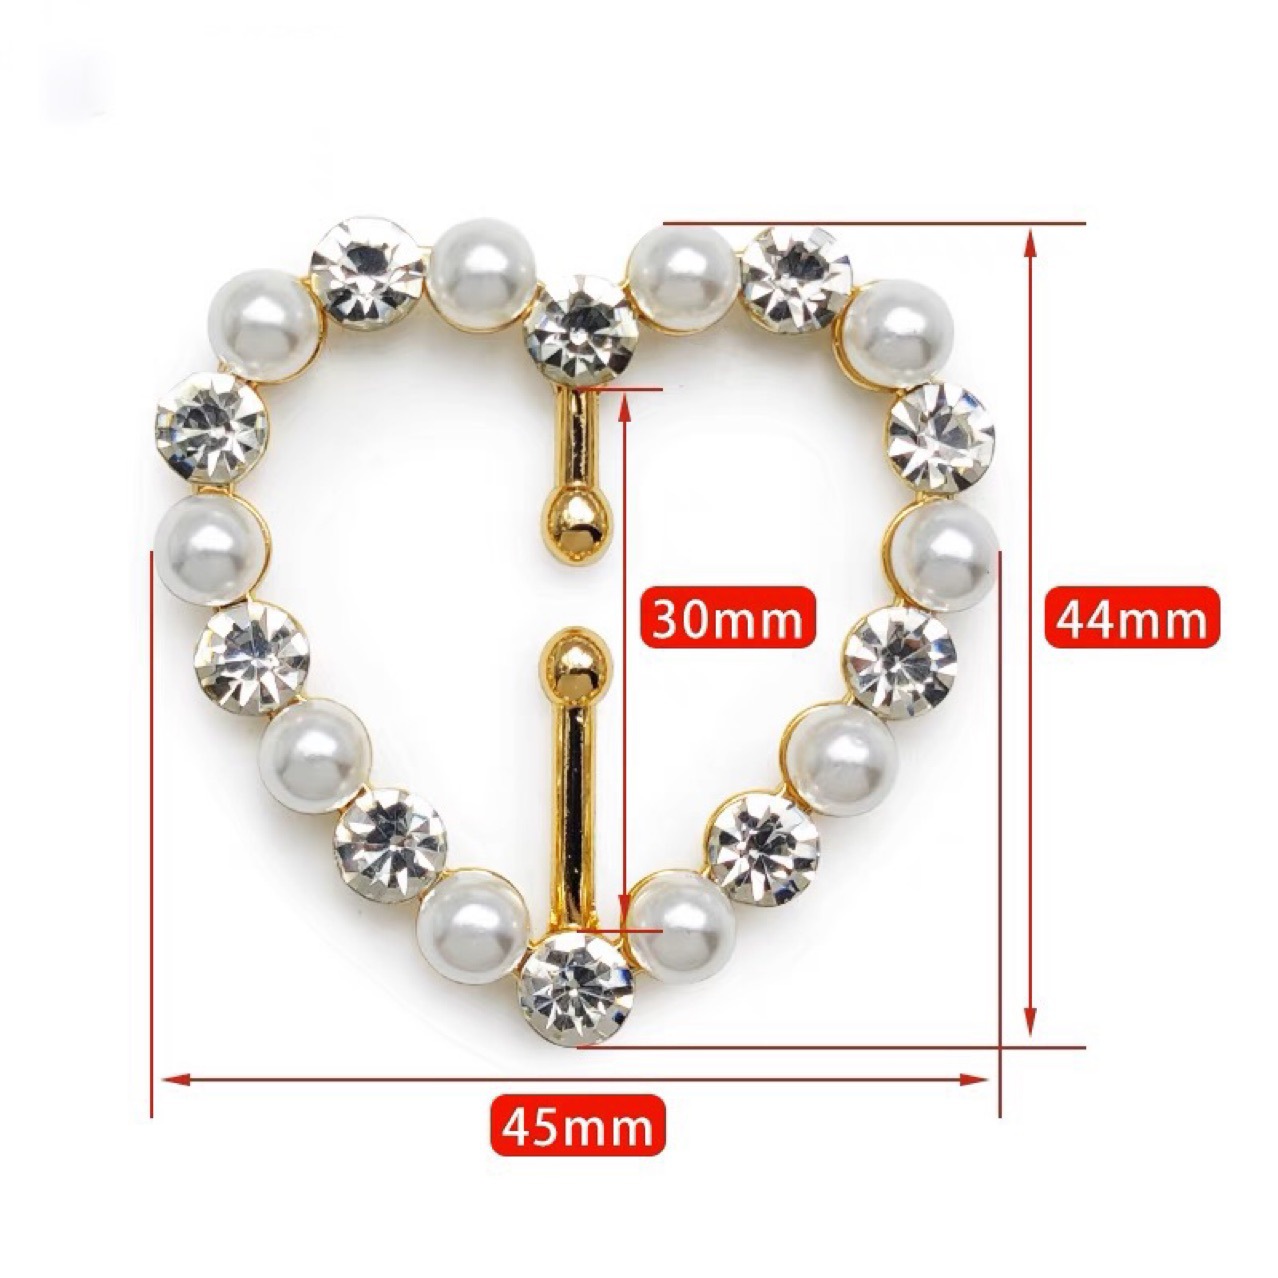 Heart-Shaped Metal Buckle Adjustable Buckle Heart-Shaped Trench Coat Belt Retaining Ring All-Match Pearl Decoration Clothes and Bags Accessories